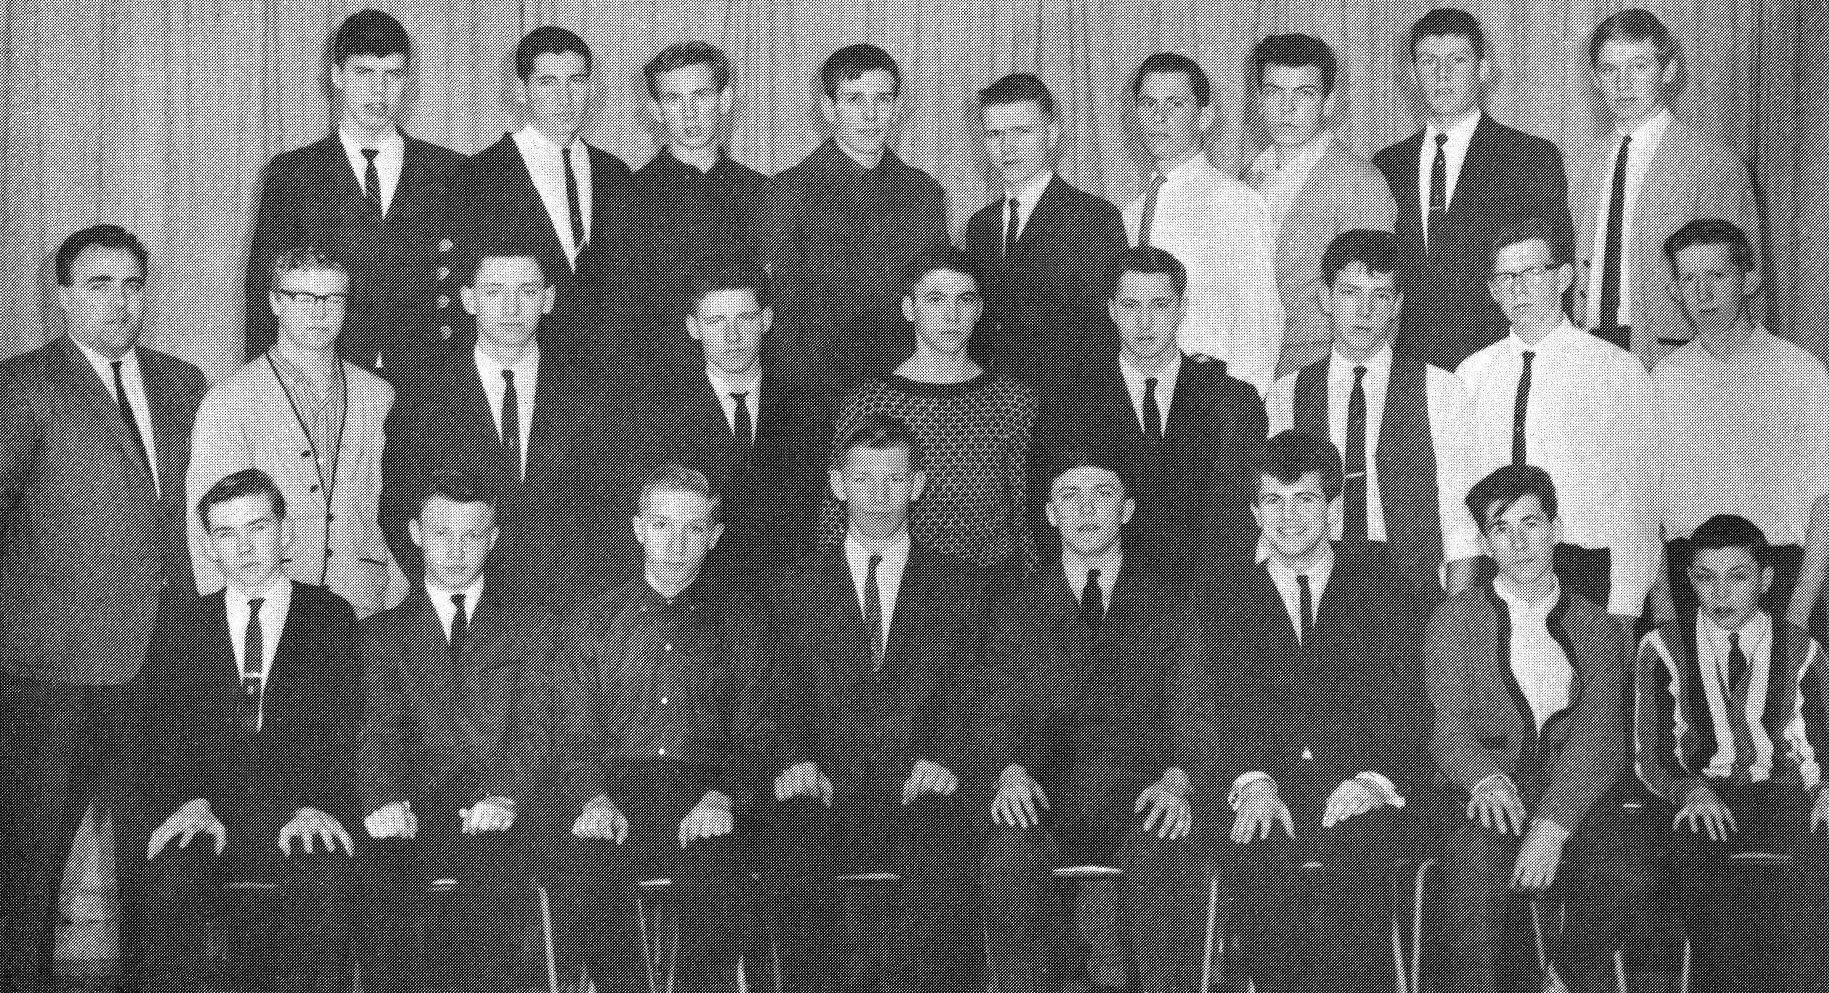 (Click to magnify) FRONT ROW: B. Bailey, S. Holt, T. Hopcraft, Bruce Gillham, Bruce Richardson, R. Cain, E. Filliault, Mike Morrison; SECOND ROW: Mr.Ray Newton, Gord James, J. Stone, A. Yake, D. Wood, P. Yates, B. Hodgeson, J. Warner, H. Monaham; BACK ROW